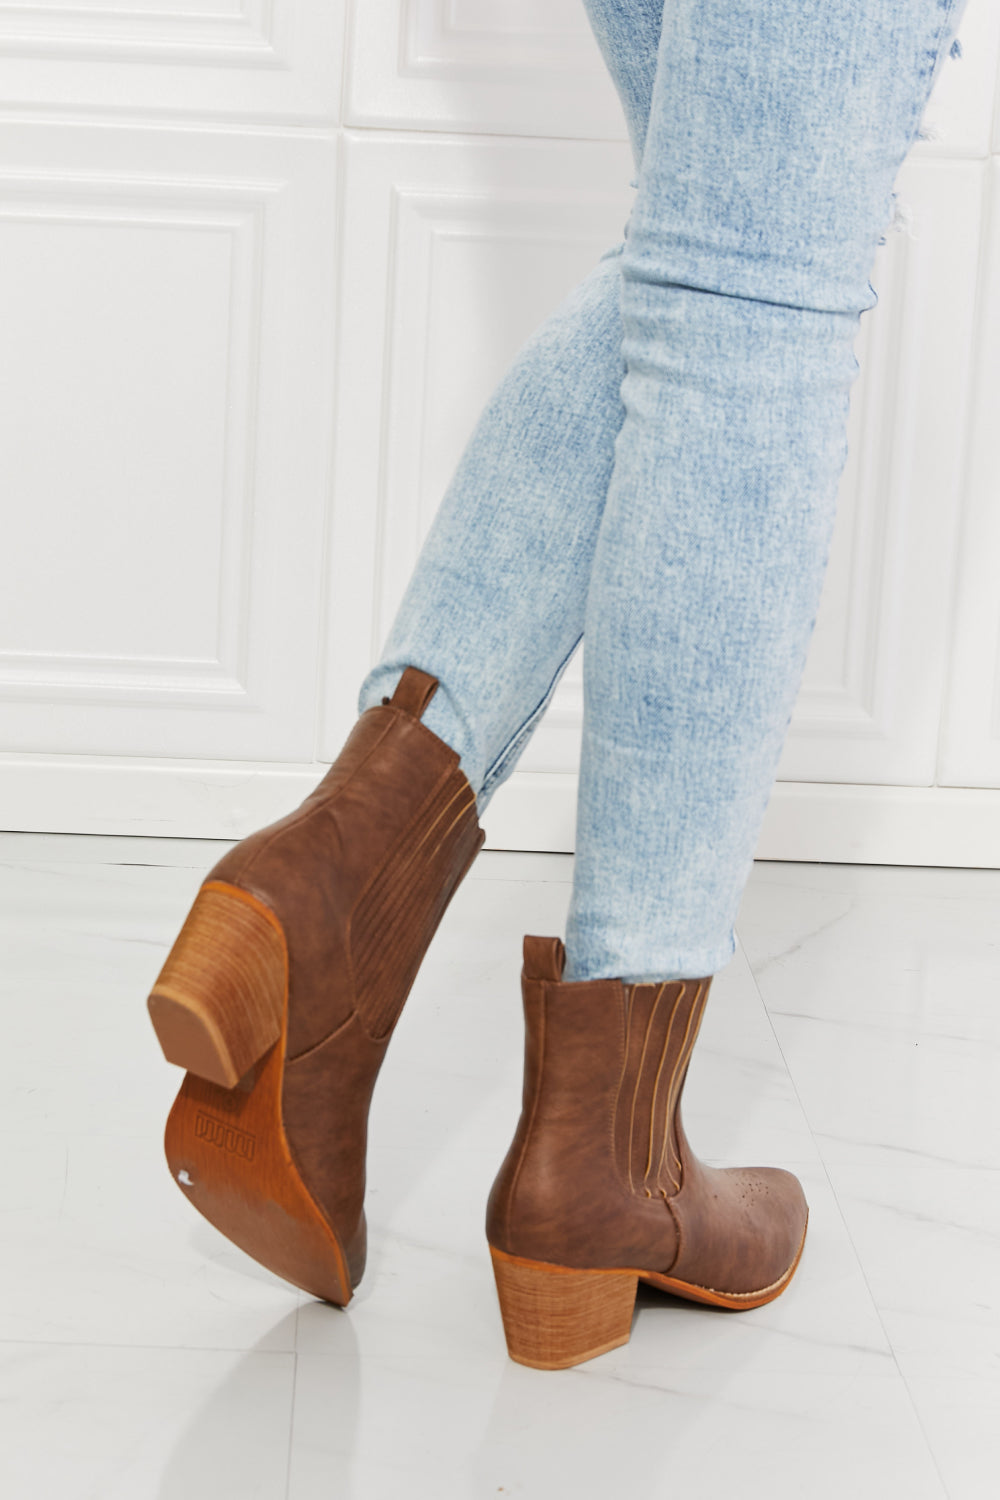 MMShoes Love the Journey Stacked Heel Chelsea Boot in Chestnut The Stout Steer